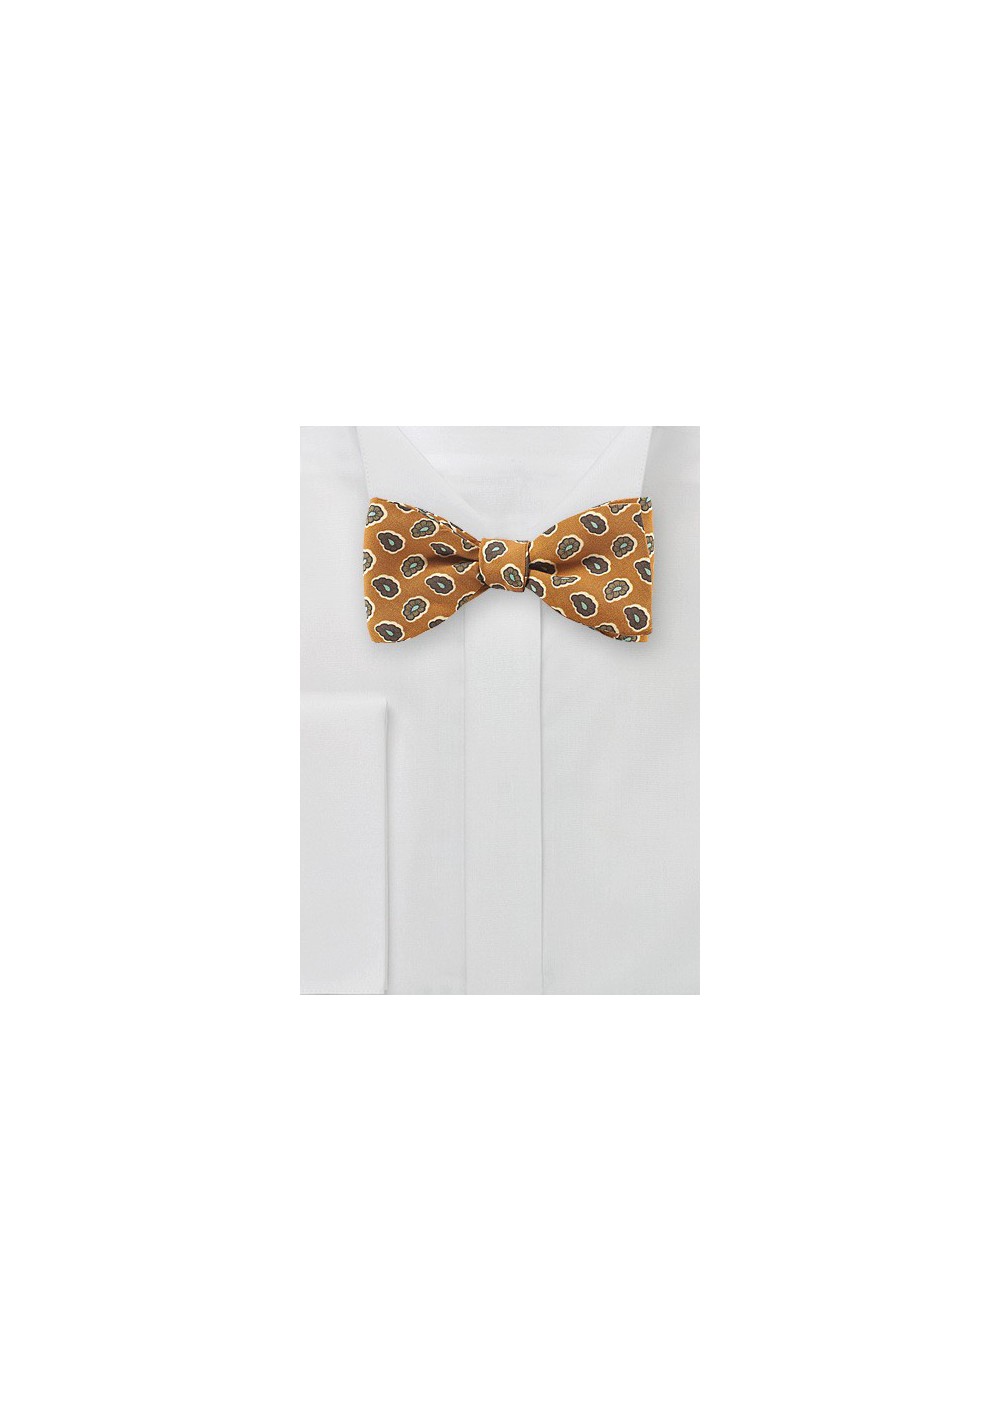 Vintage Paisley Bow Tie in Golden Curry